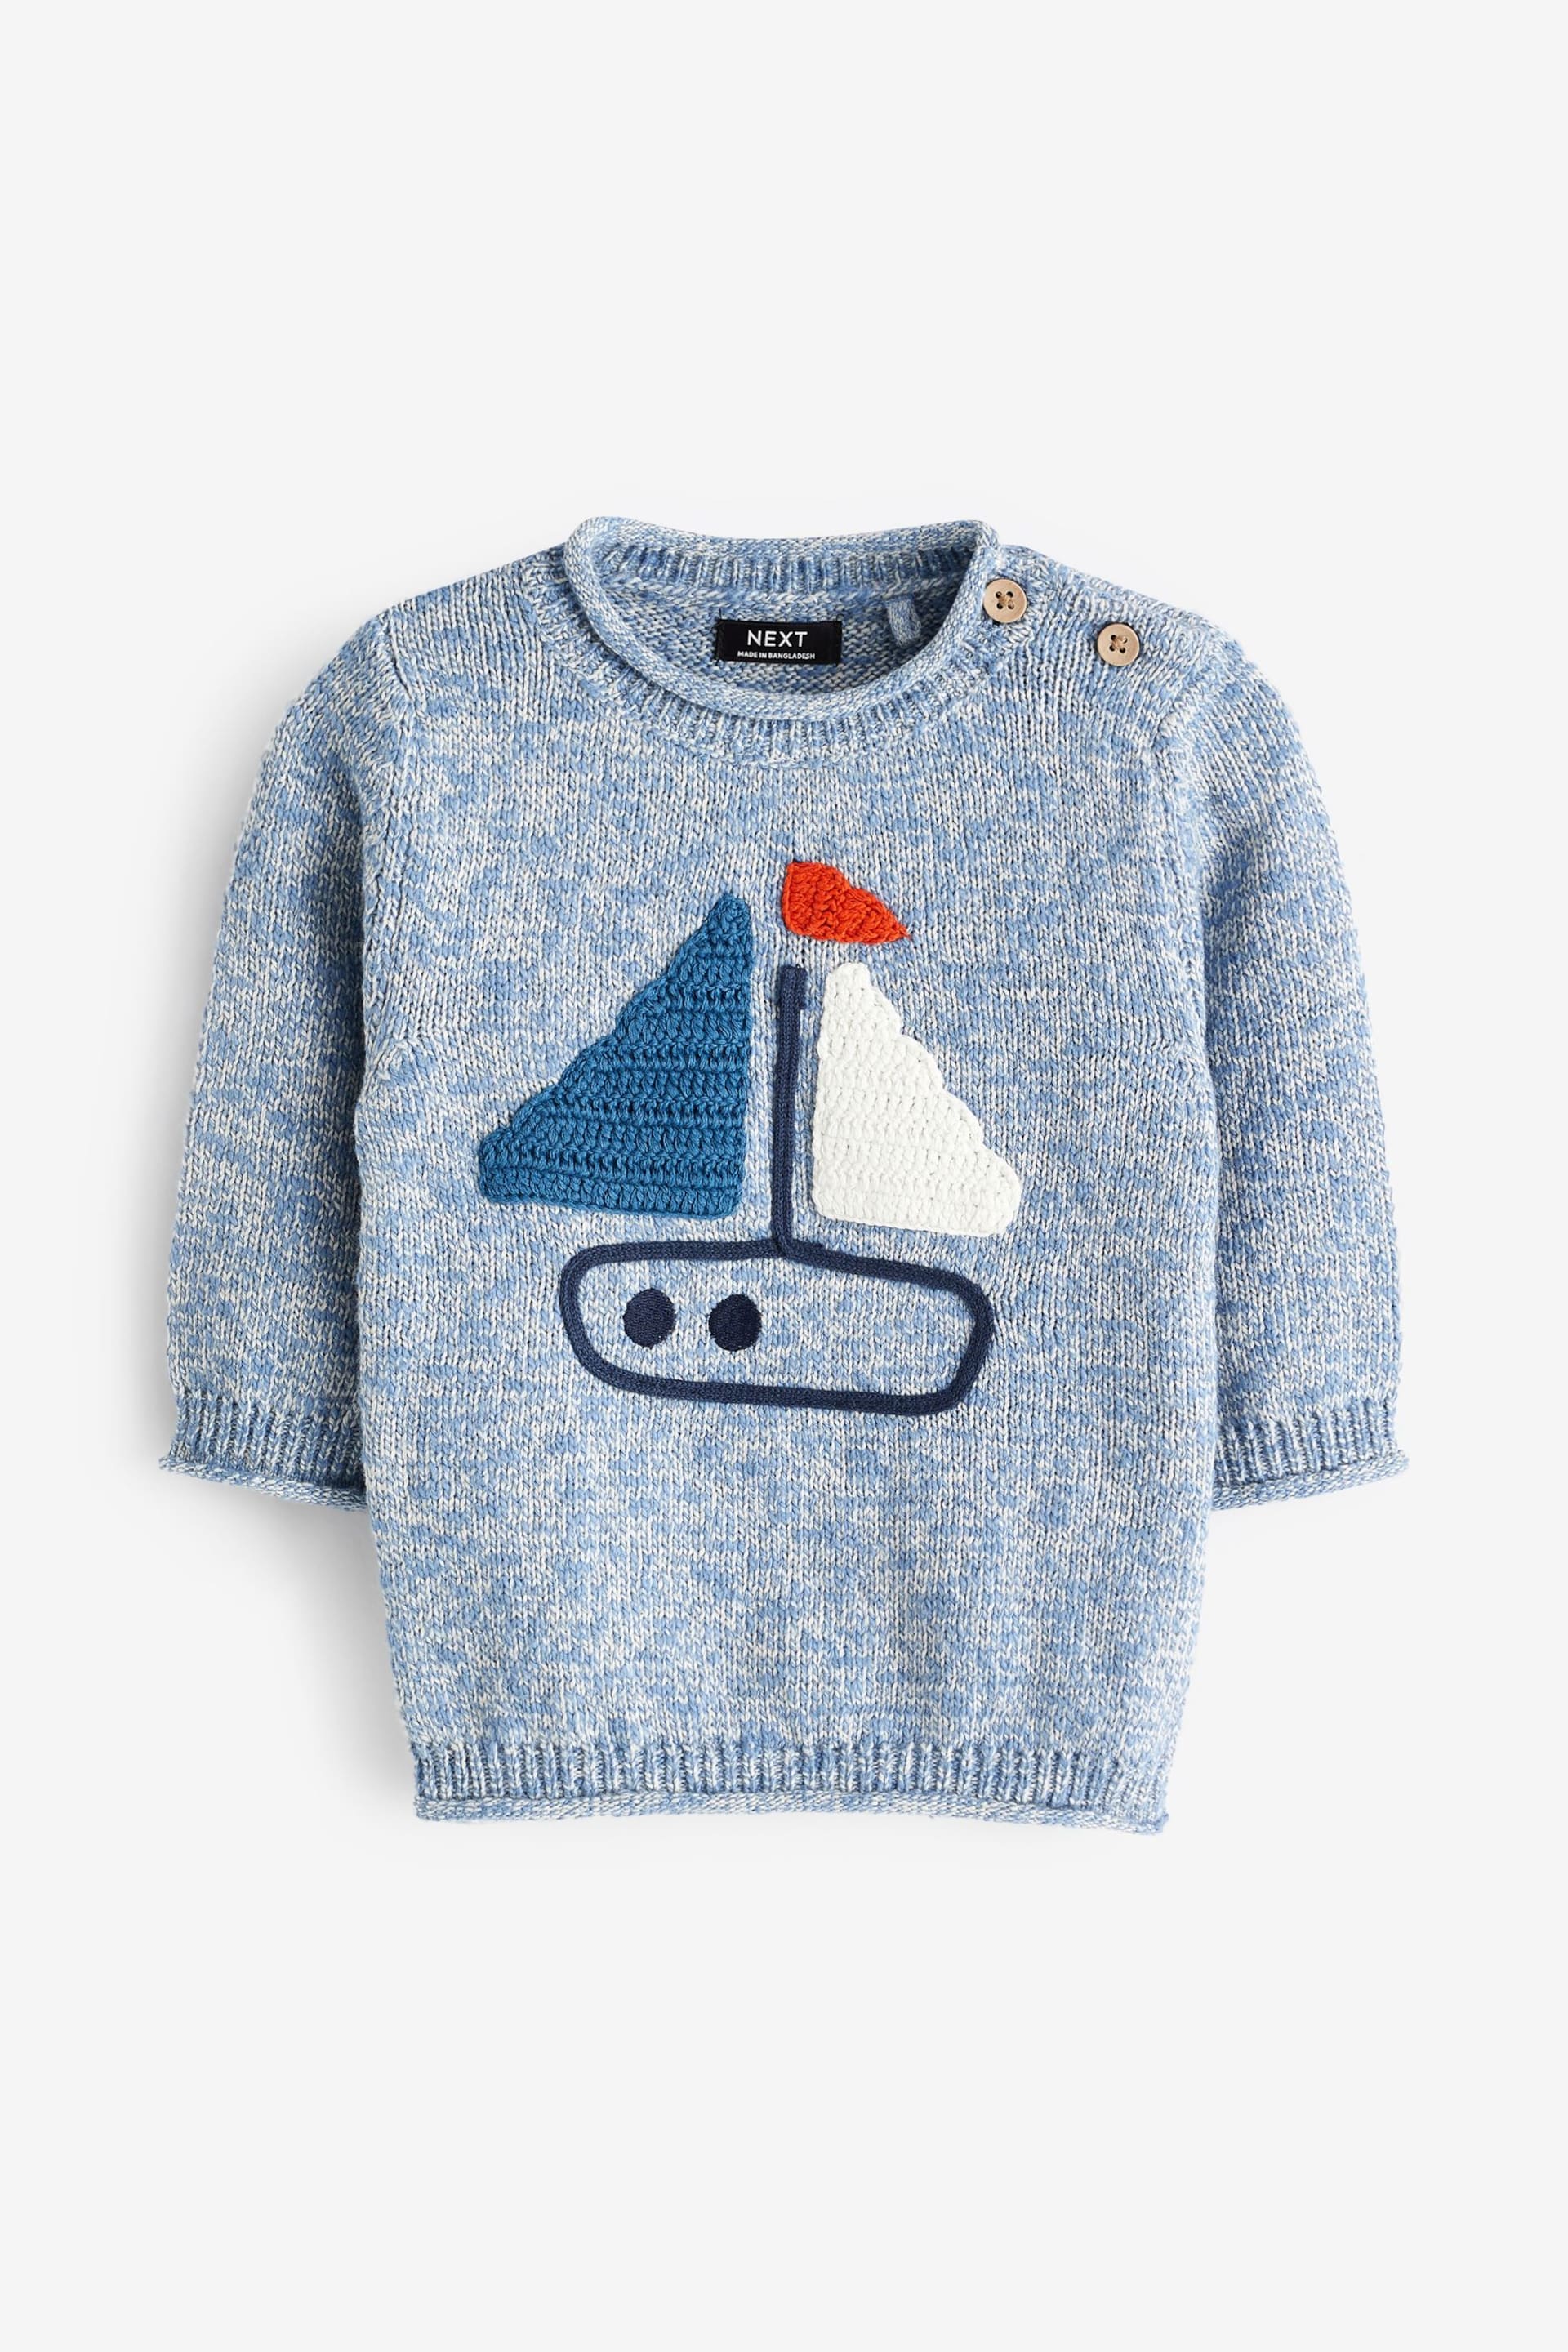 Blue Character Boat Knit Crew Jumper (3mths-7yrs) - Image 4 of 6